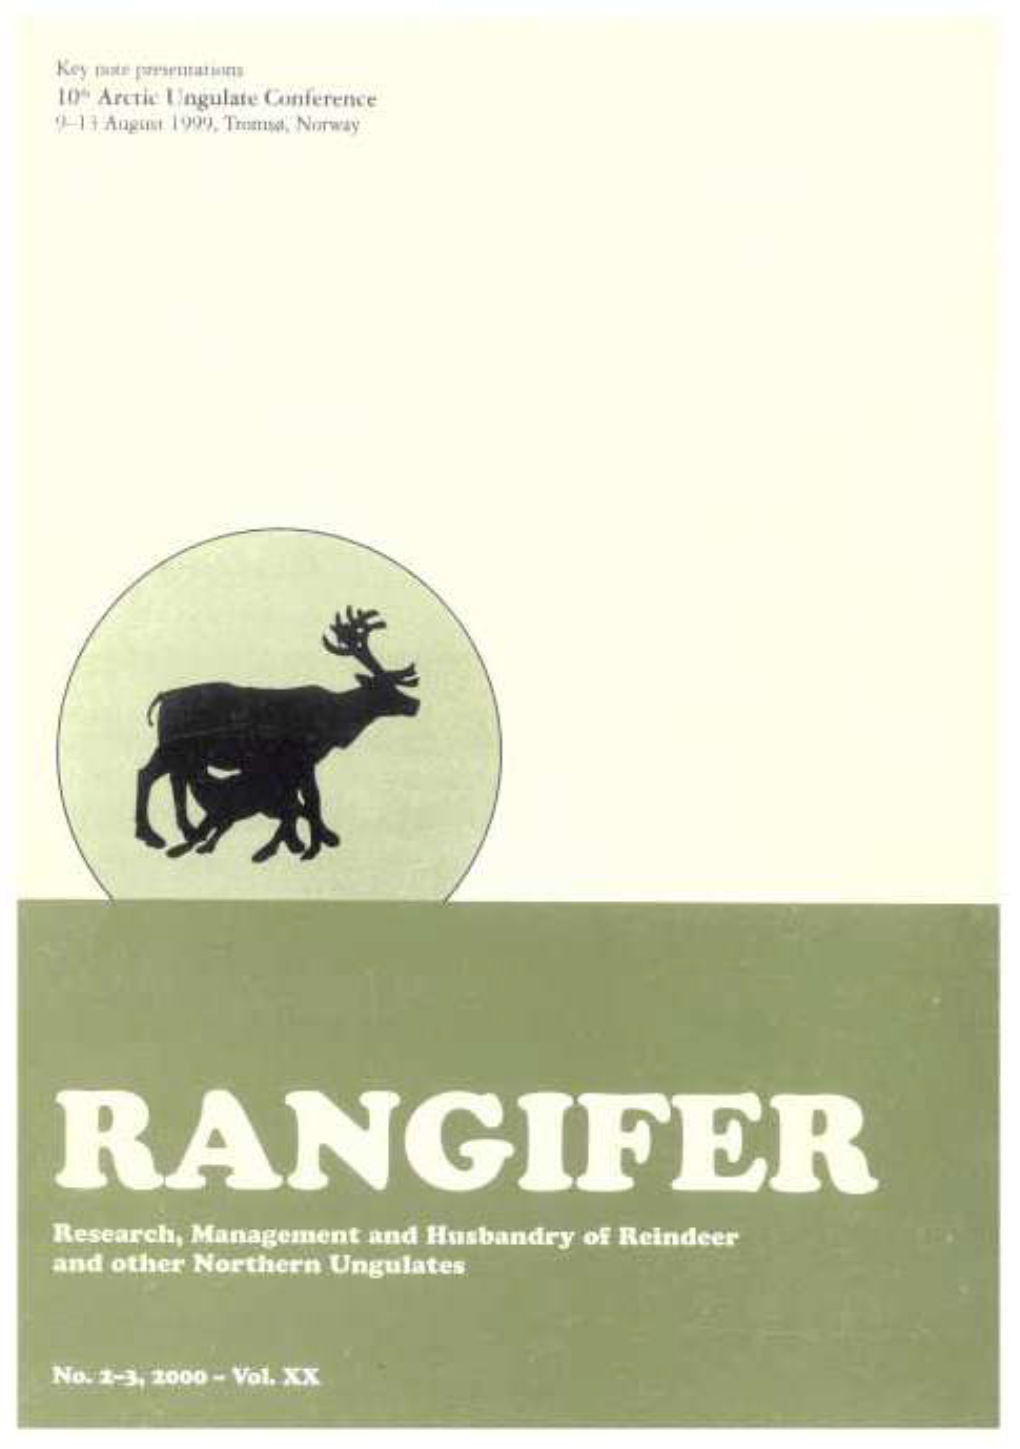 RANGIFER Ruearcht Man Jument -Md Husbandry of Reindeer and Other Northern Unguutei